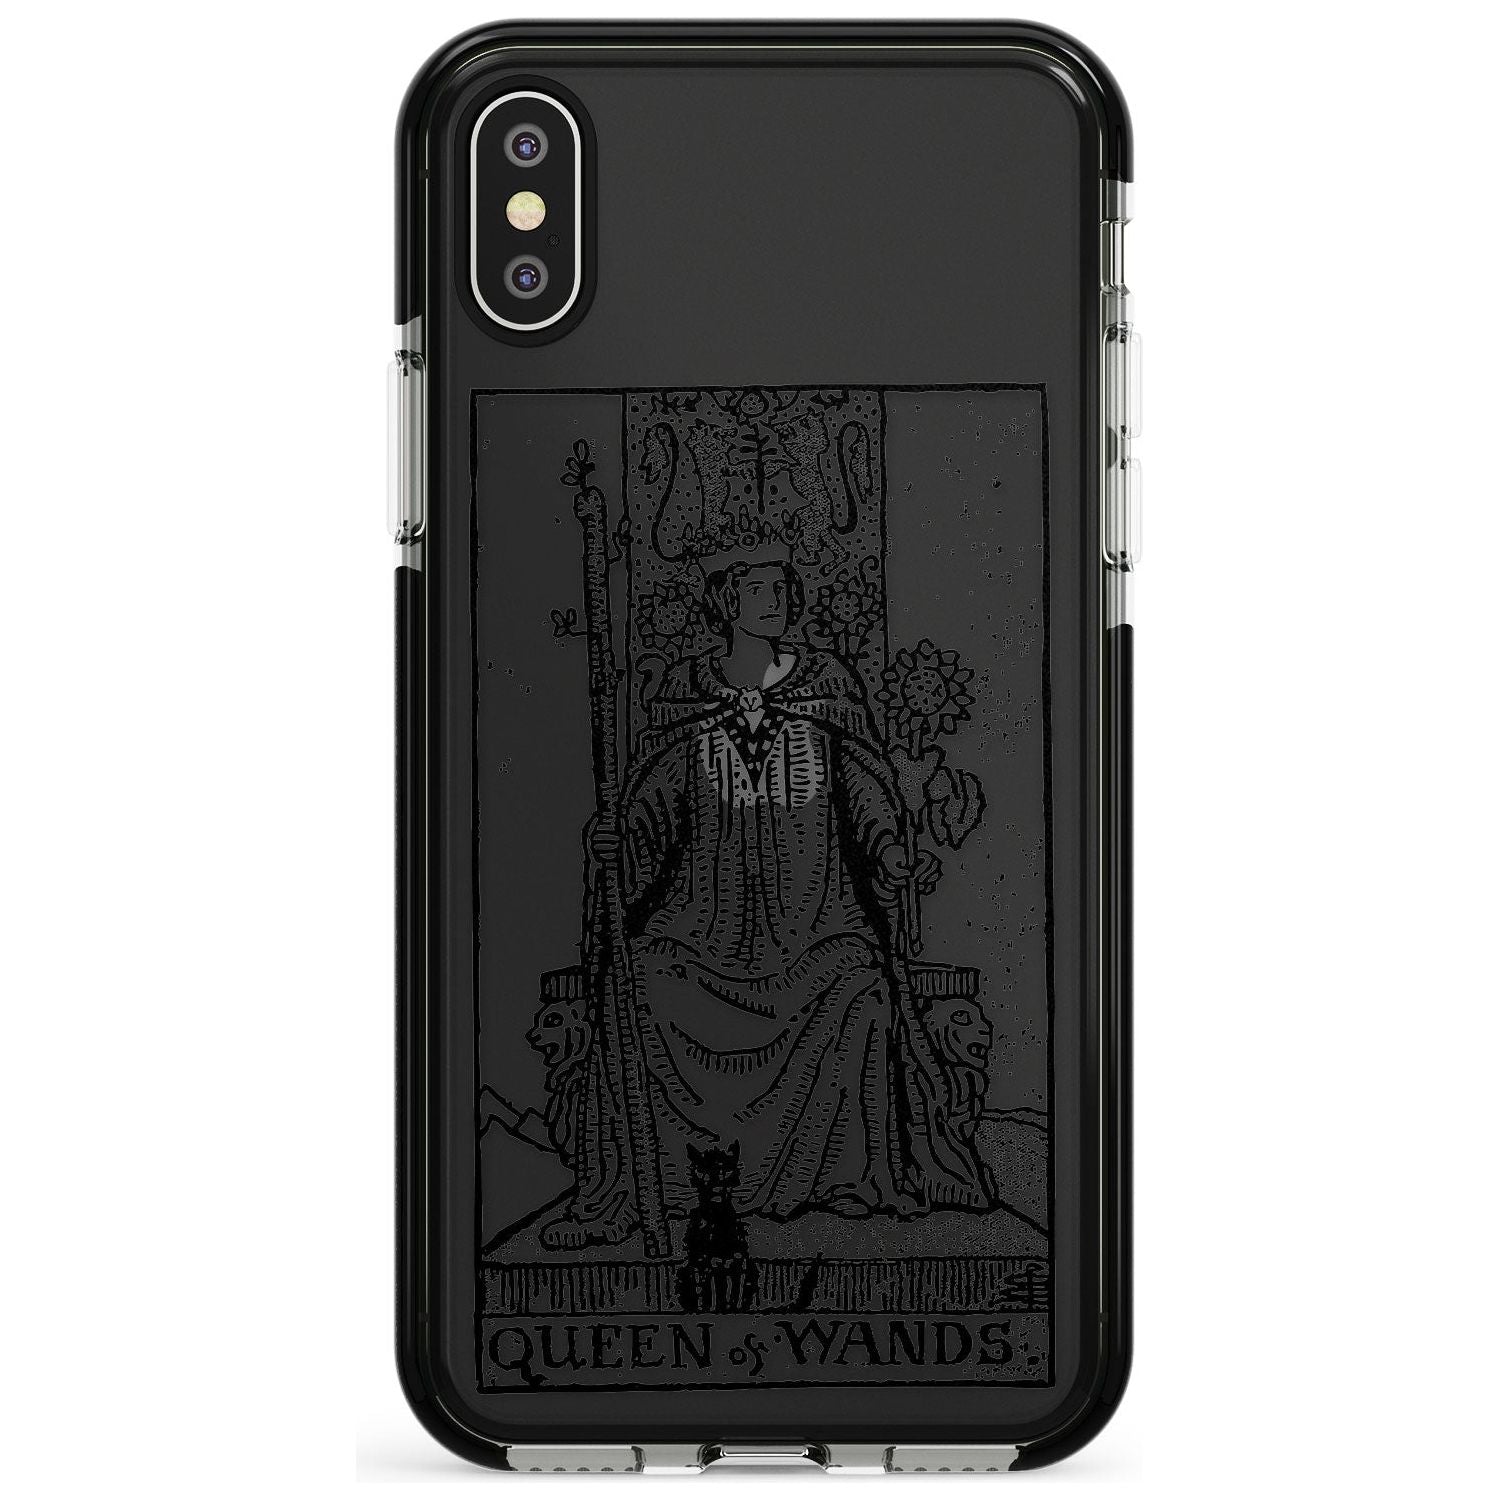 Queen of Wands Tarot Card - Transparent Pink Fade Impact Phone Case for iPhone X XS Max XR